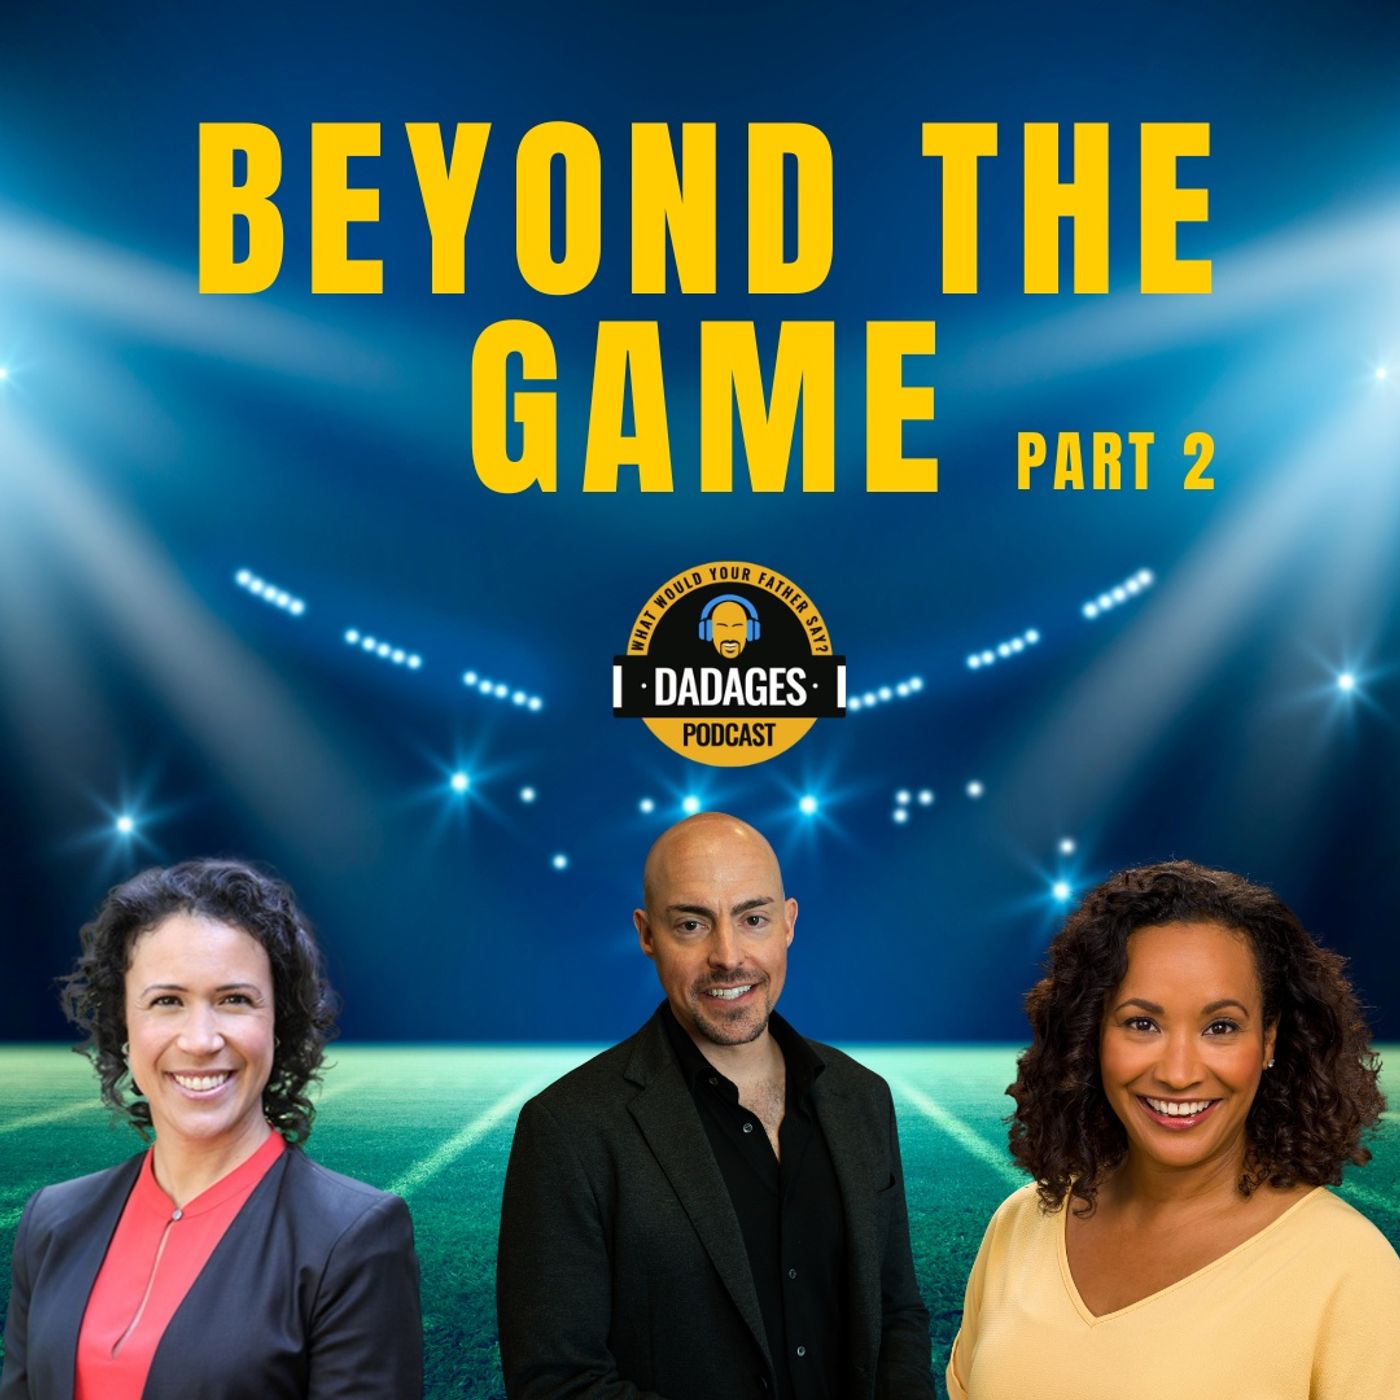 Beyond the Game: Pioneers of Progress in Sports Part 2